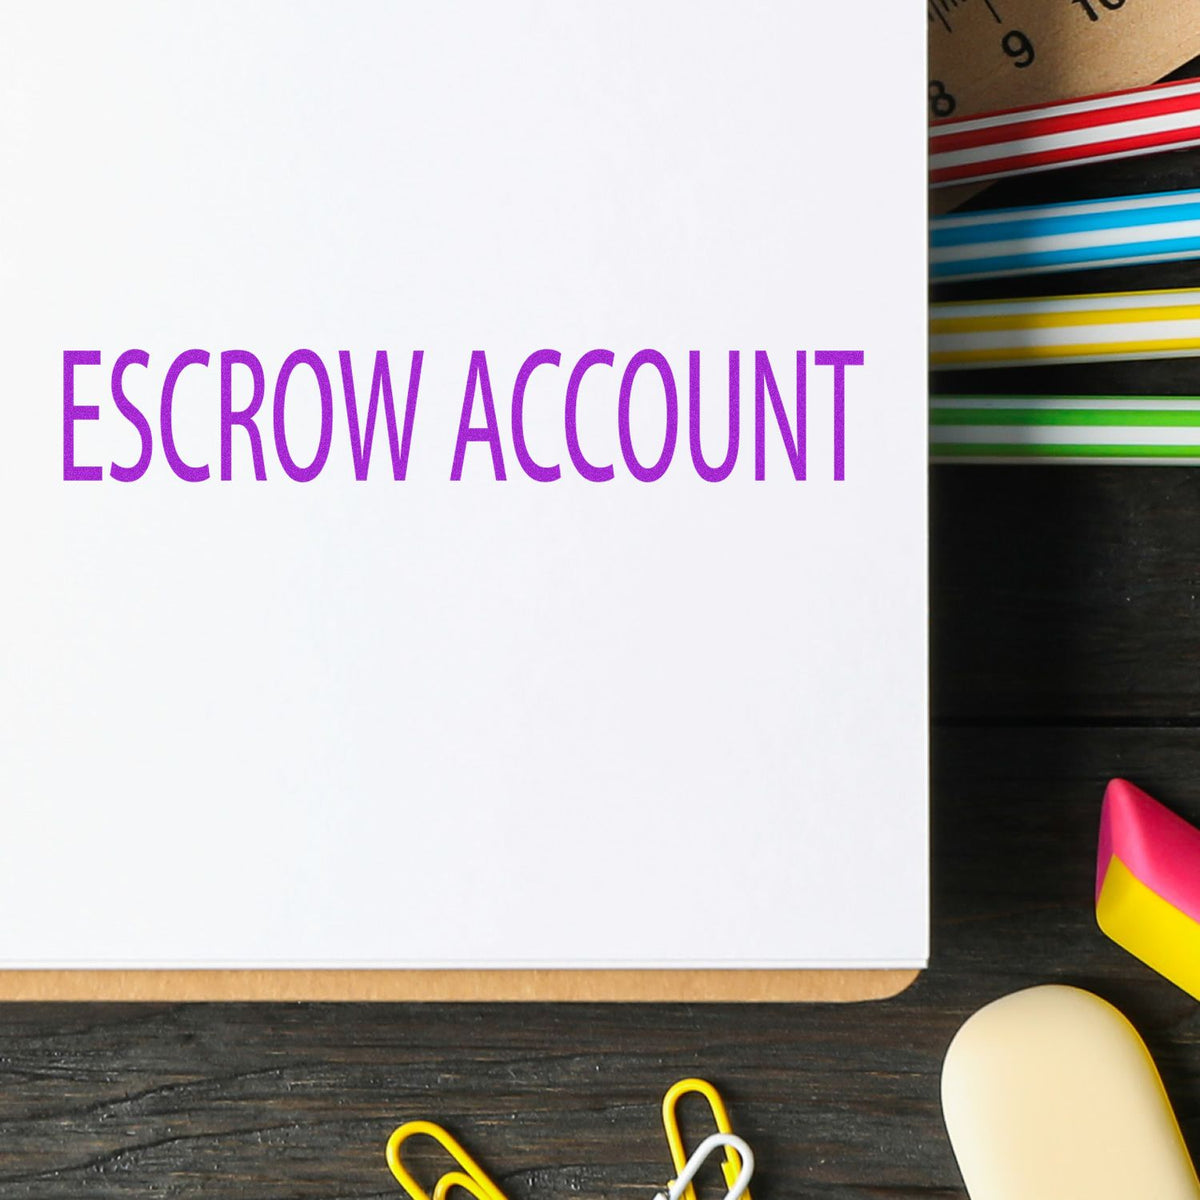 Escrow Account Rubber Stamp In Use